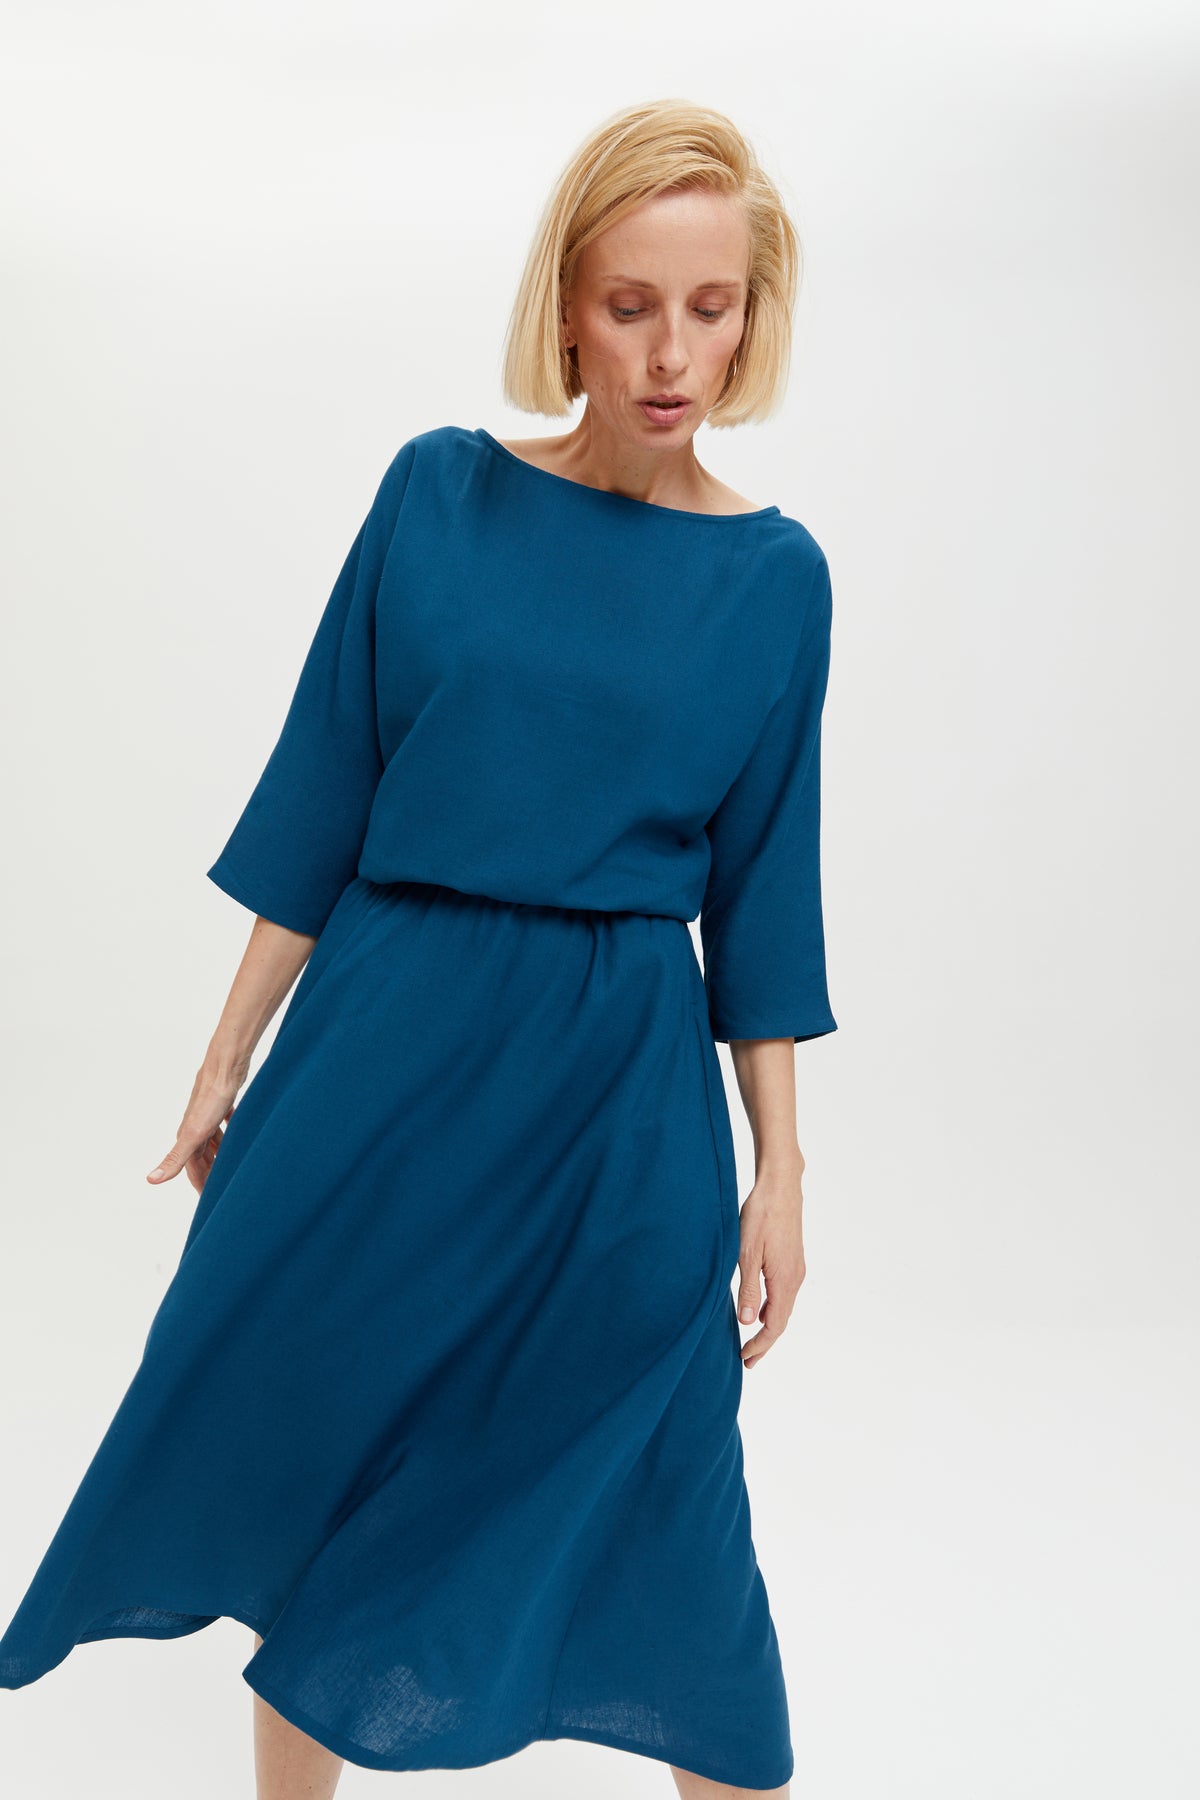 Nane | Linen Dress with 3/4 Sleeves in Petrol-Blue